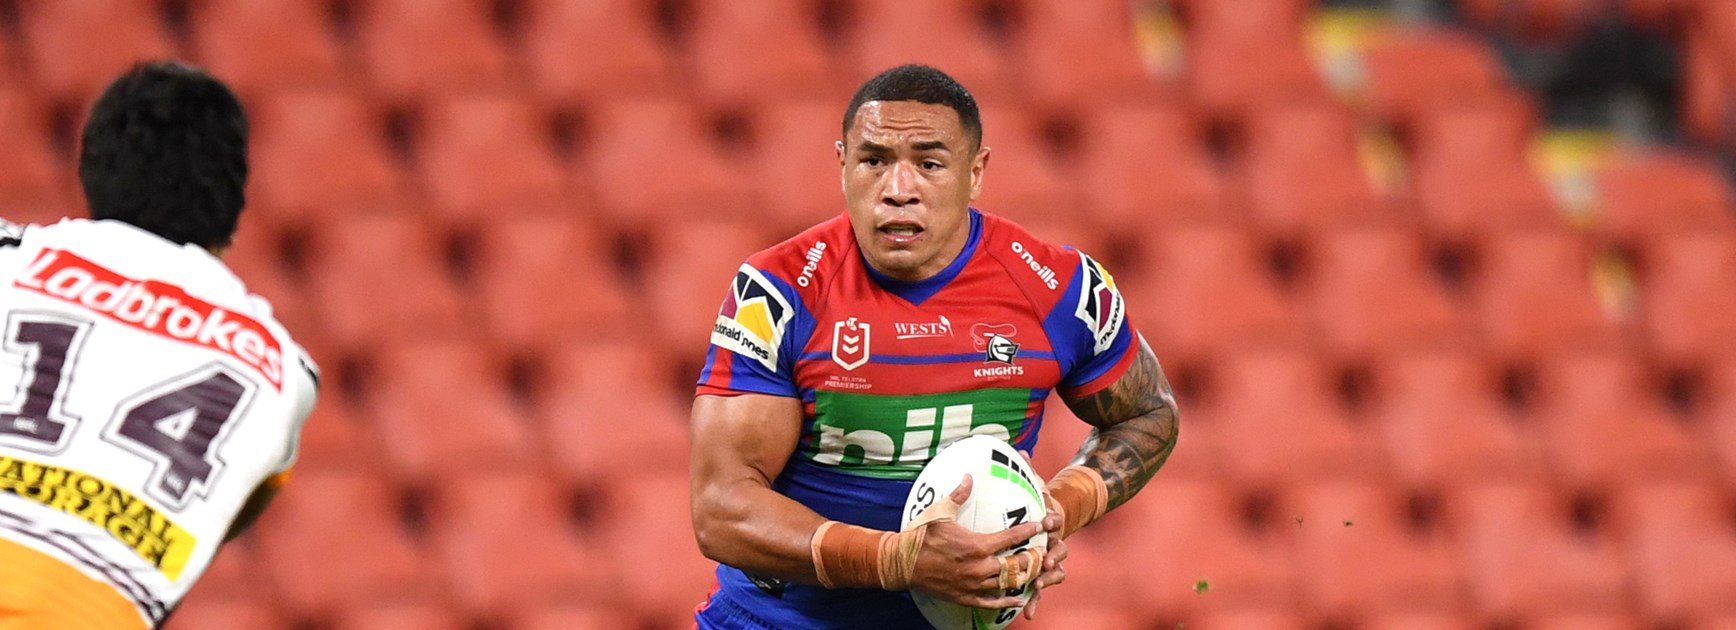 Frizell fired up to avoid finals envy